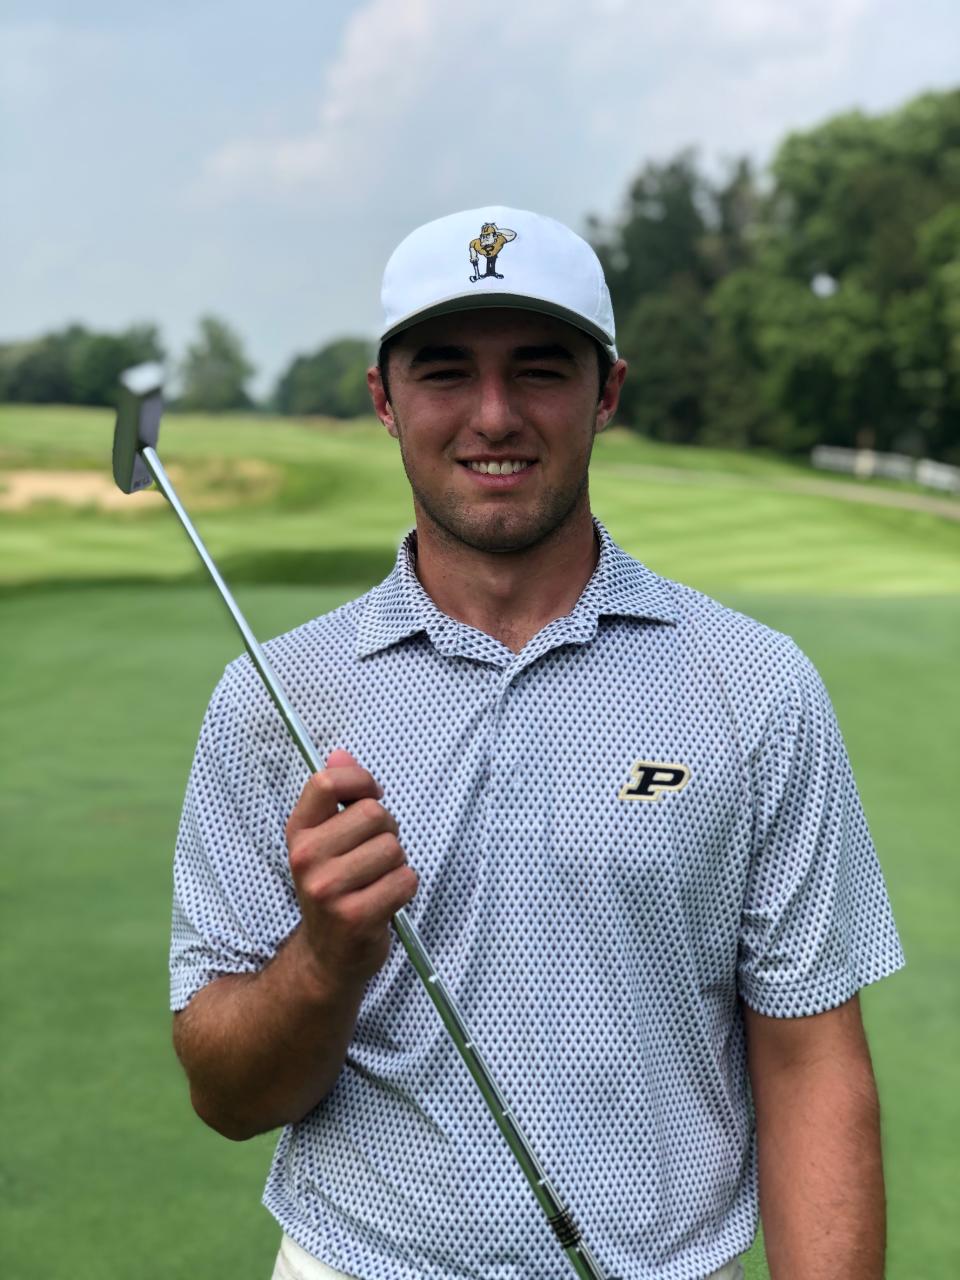 Andrew Farraye with his Bell putter